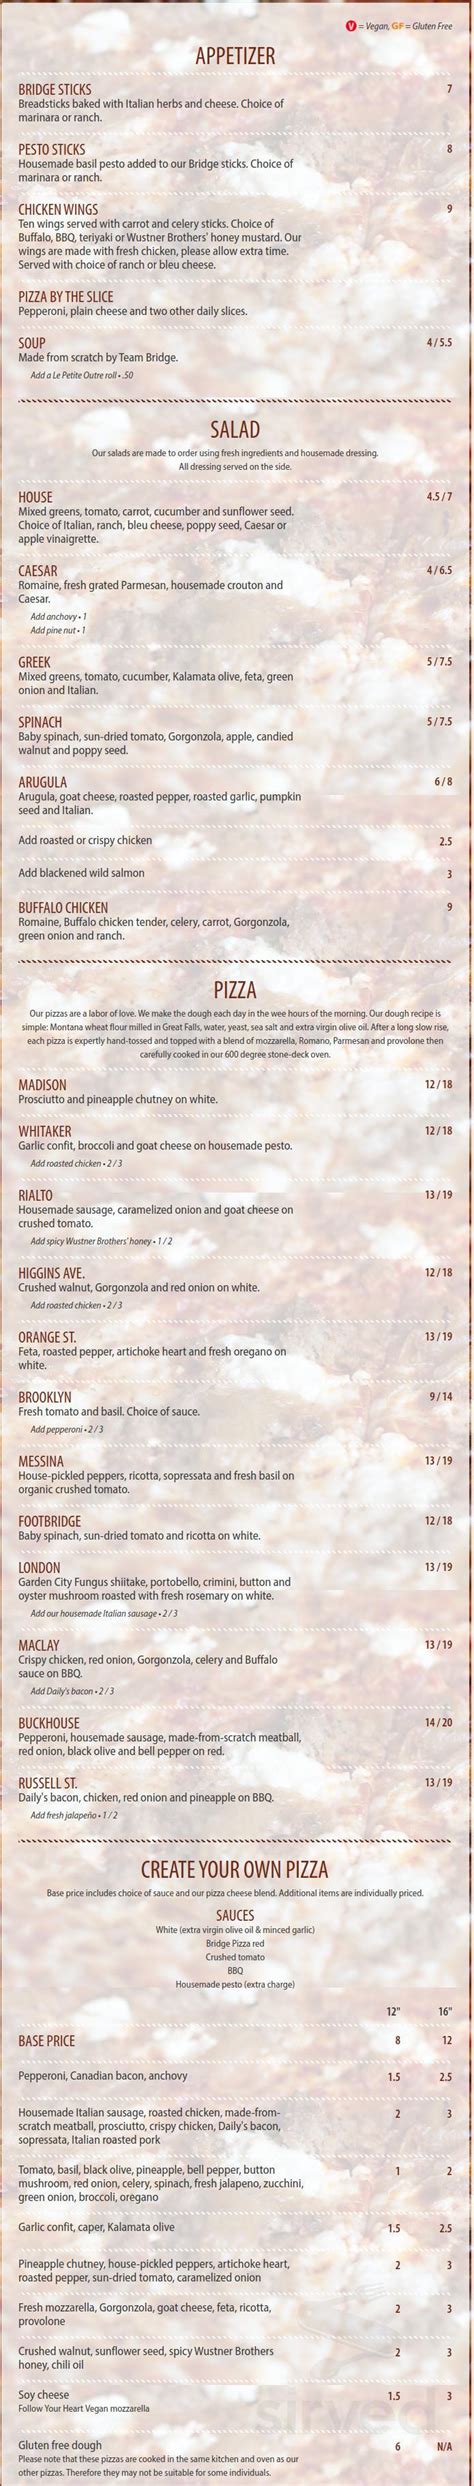 Bridge pizza missoula menu Kids may also want to try the spinach and mushroom calzone for a fuller fare